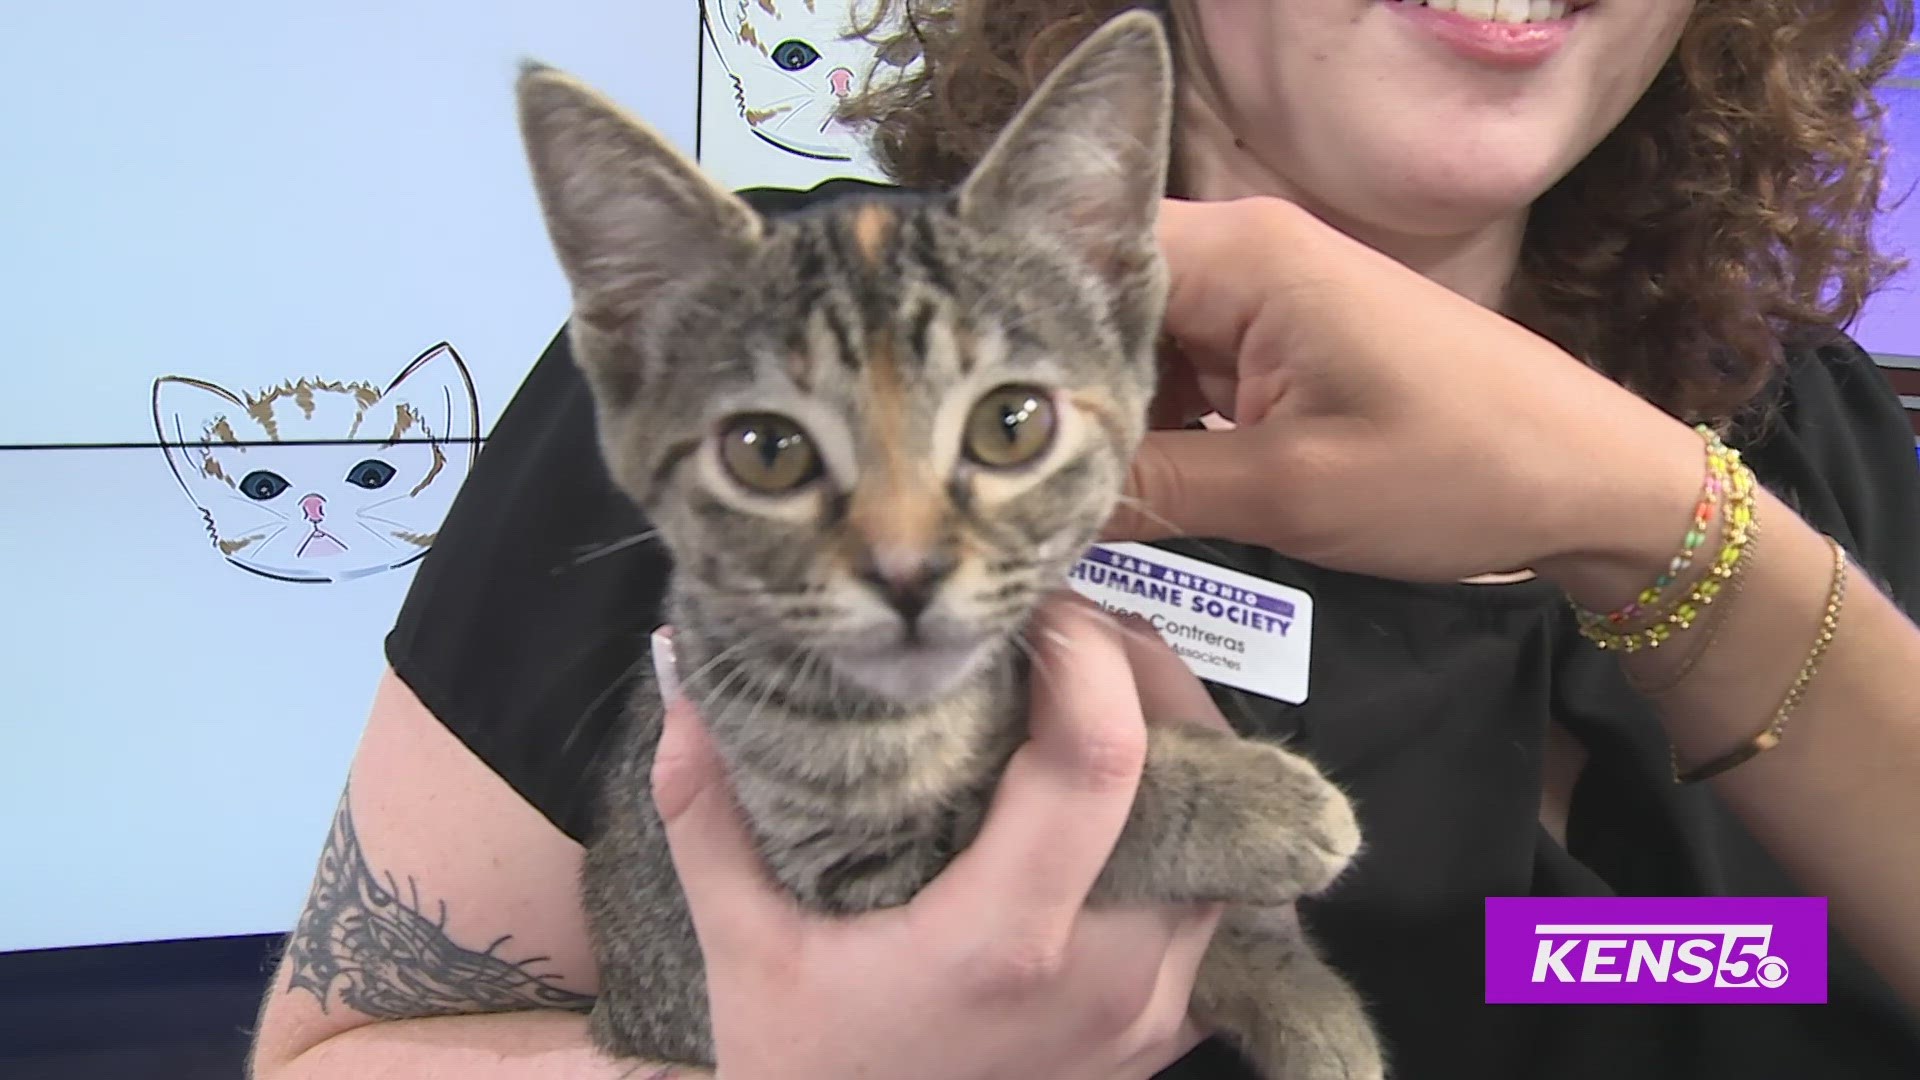 Luci Almanza with the San Antonio Humane Society brings some furry felines that are looking for their fur-ever homes.